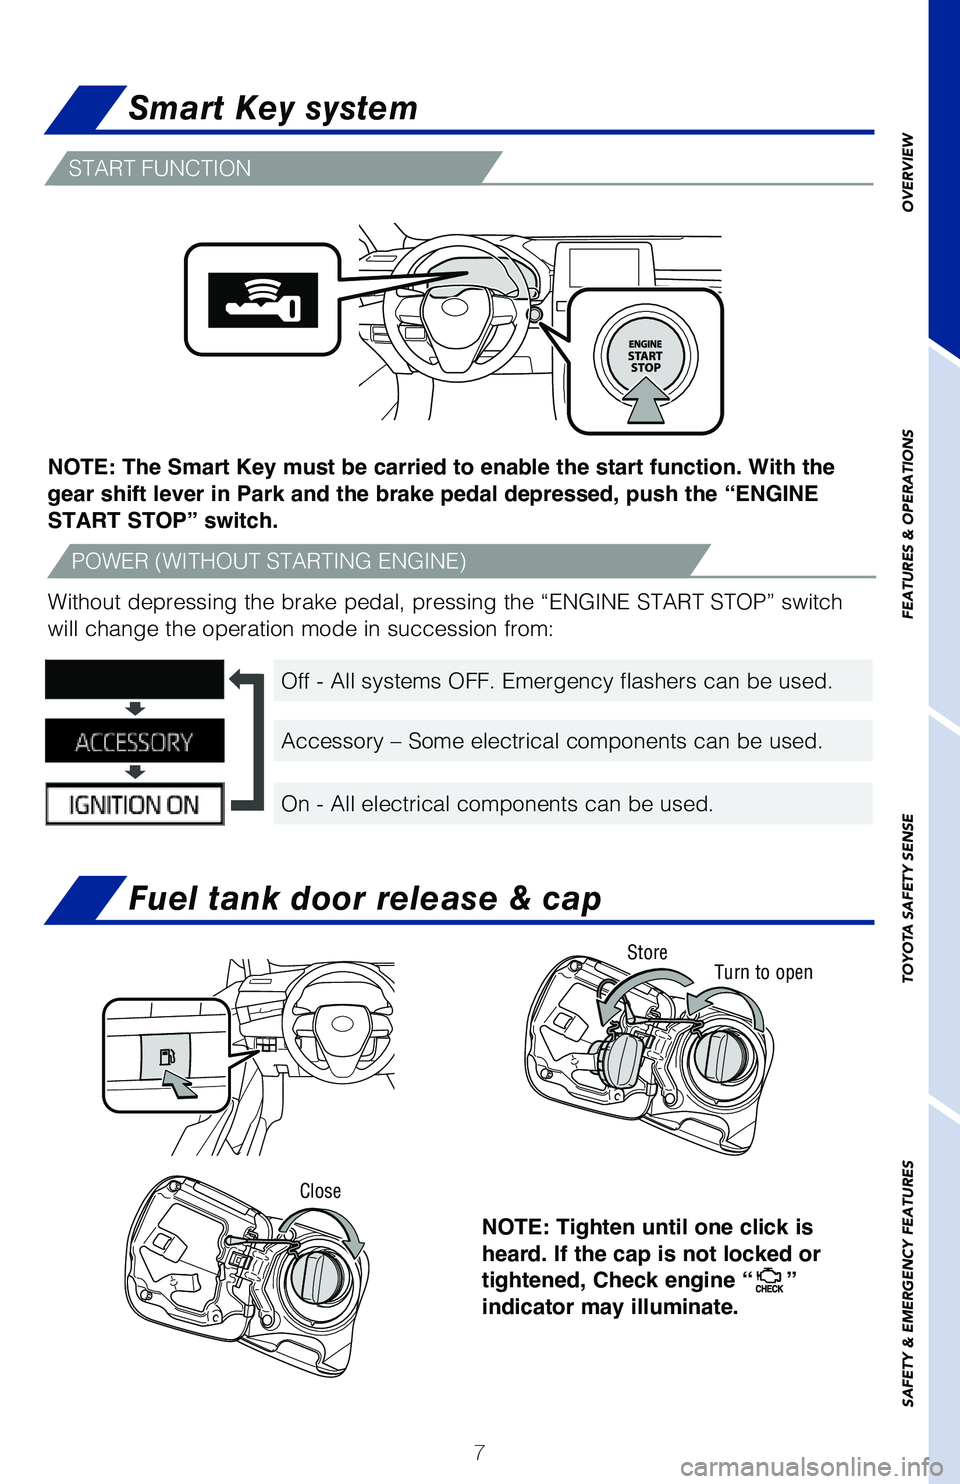 TOYOTA AVALON 2020  Owners Manual (in English) 7
Smart Key system
Fuel tank door release & cap
NOTE: The Smart Key must be carried to enable the start function. With the 
gear shift lever in Park and the brake pedal depressed, push the “ENGINE 
